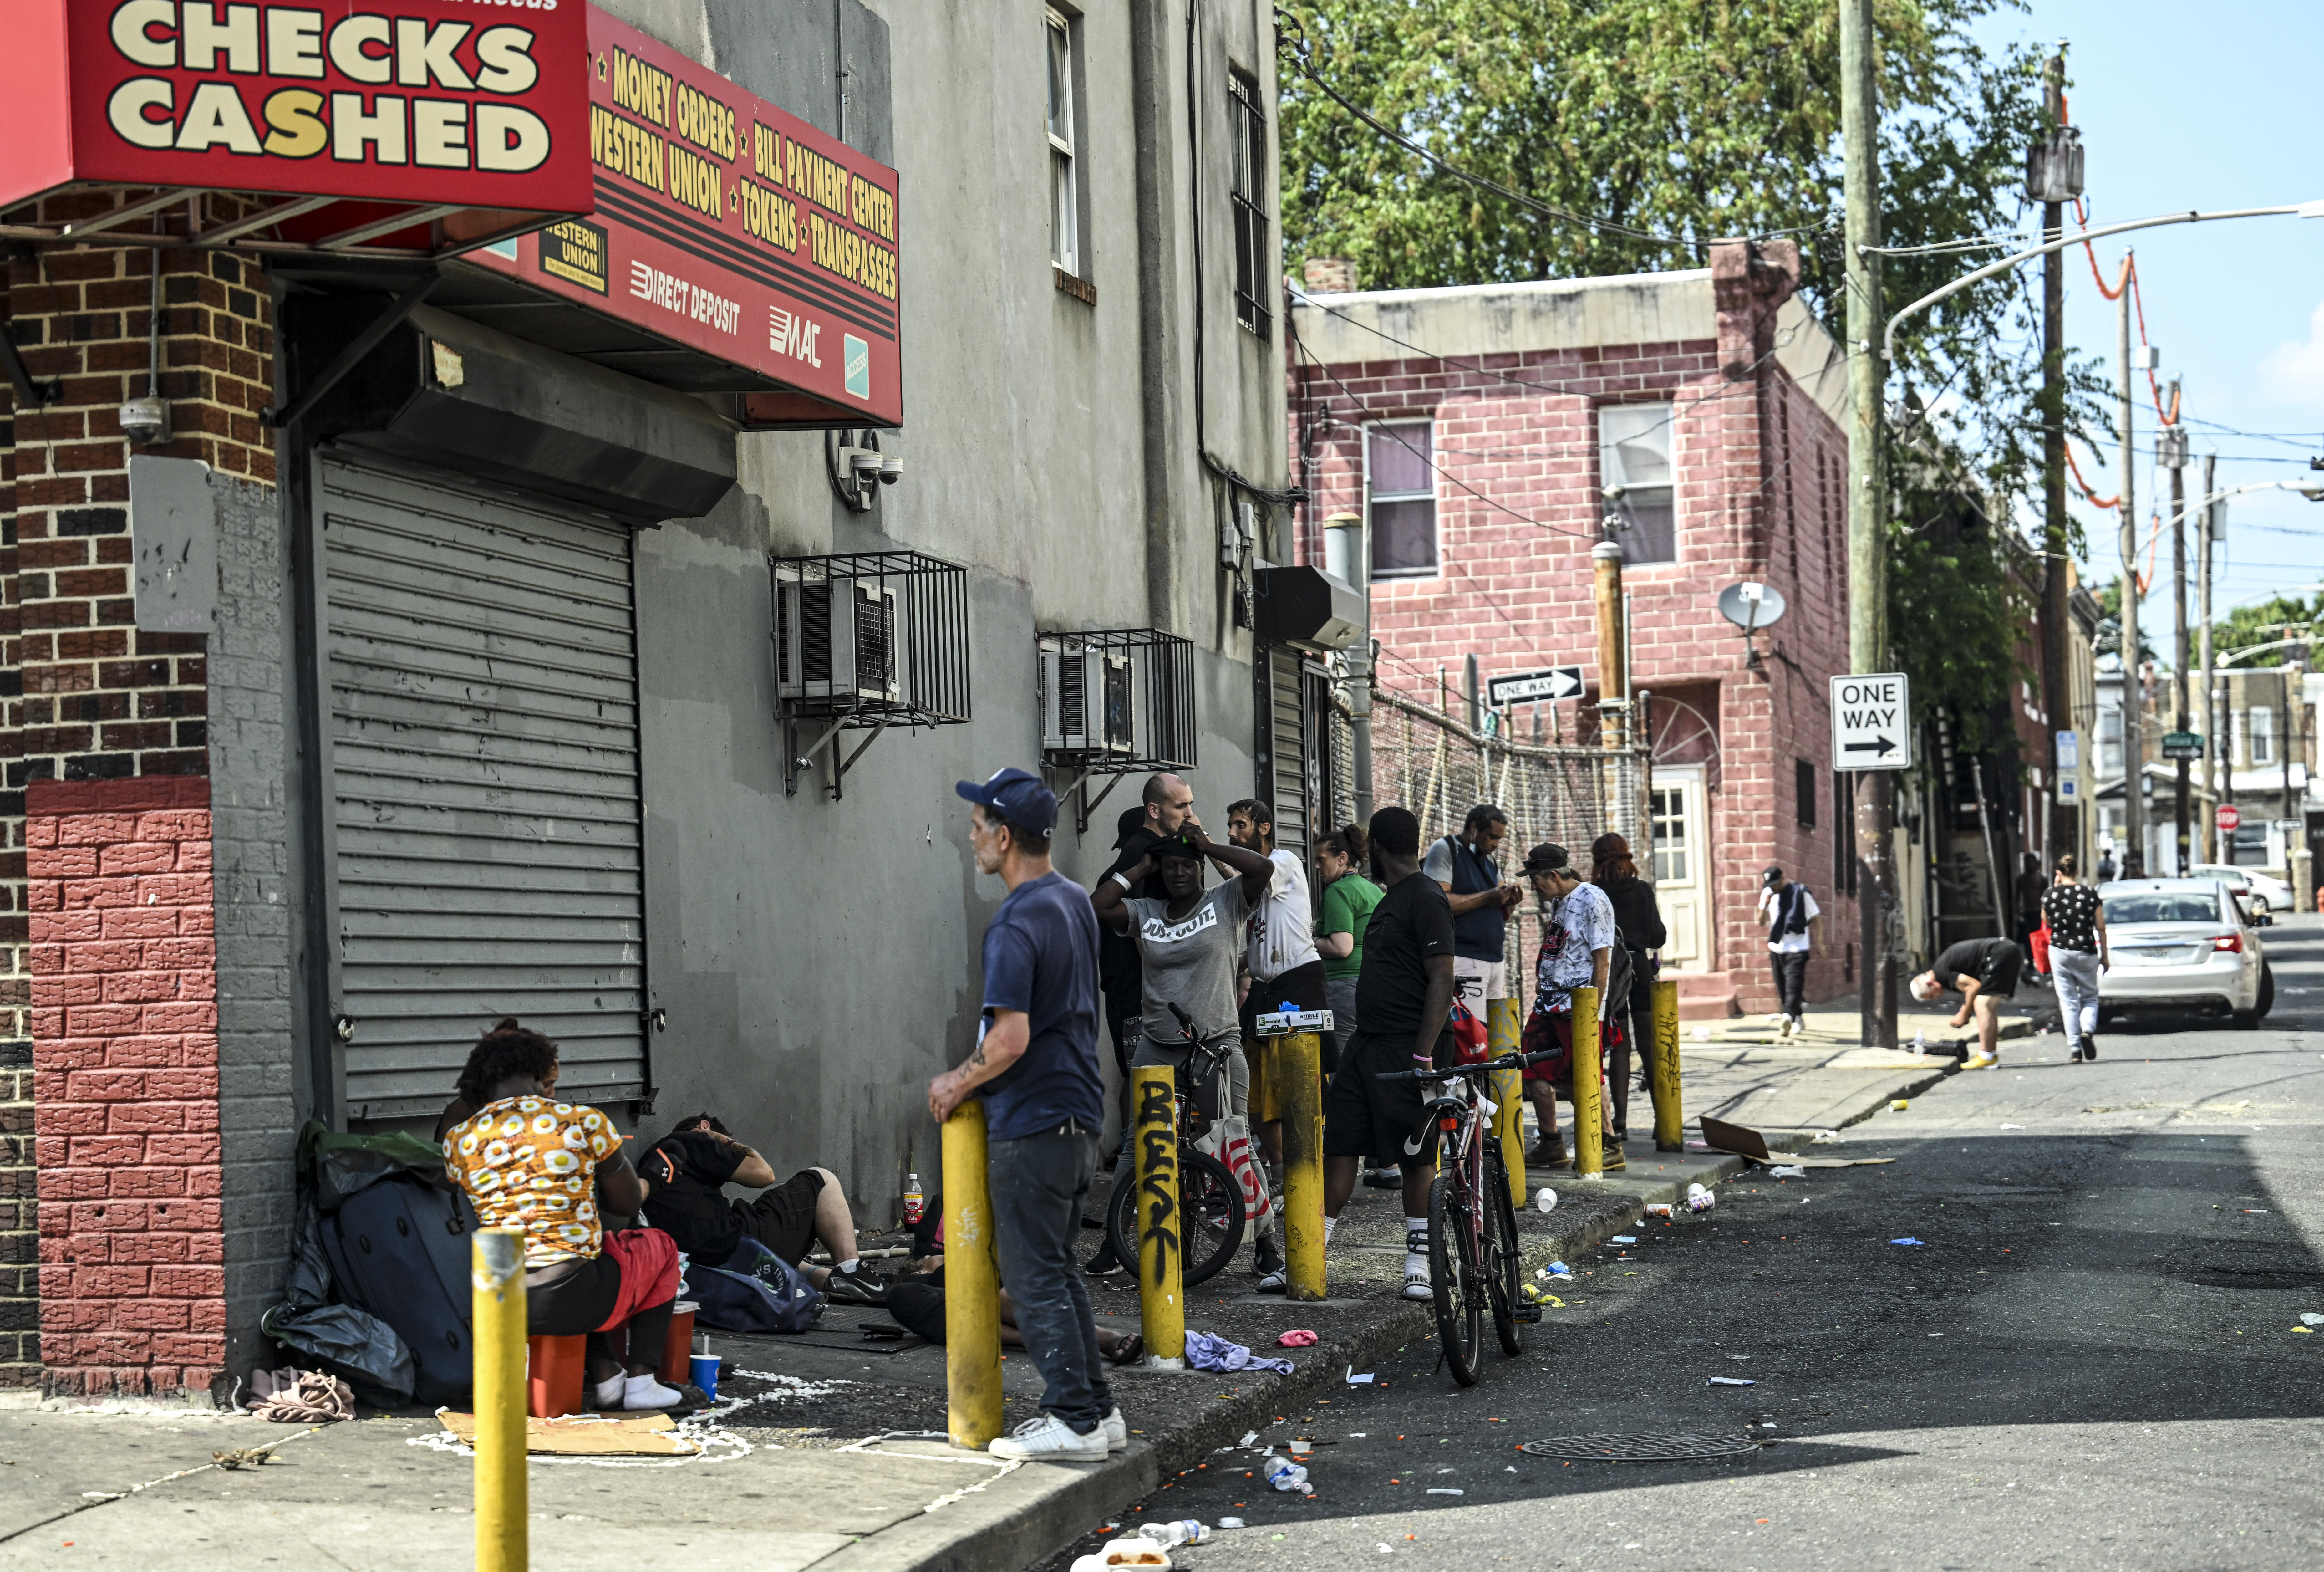 Can Philadelphia Fix One of the Most Drug-Plagued Neighborhoods in the Country?